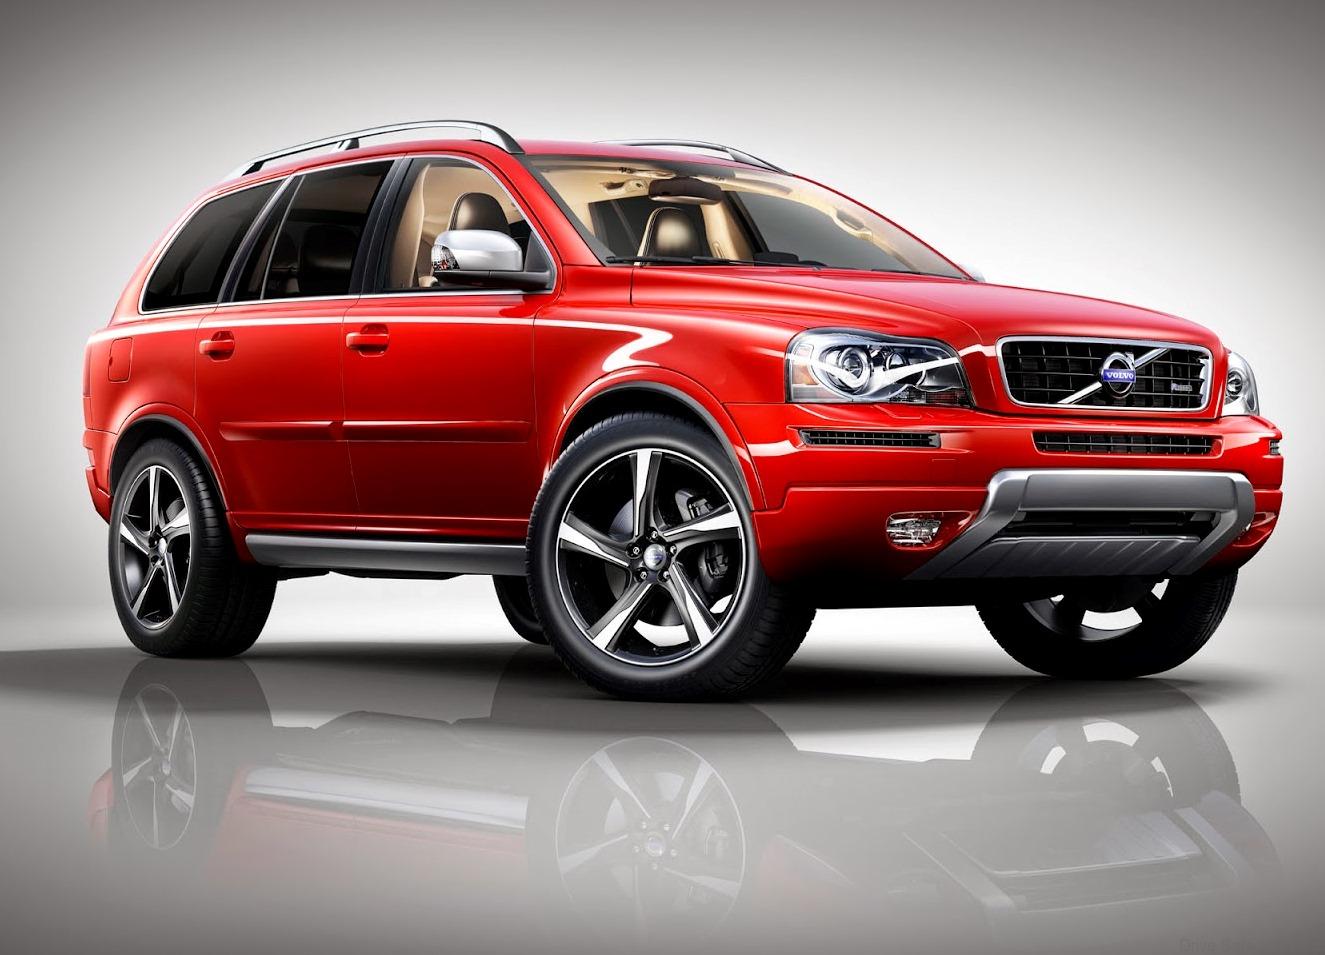 Volvo XC90 SUV Used Car Review